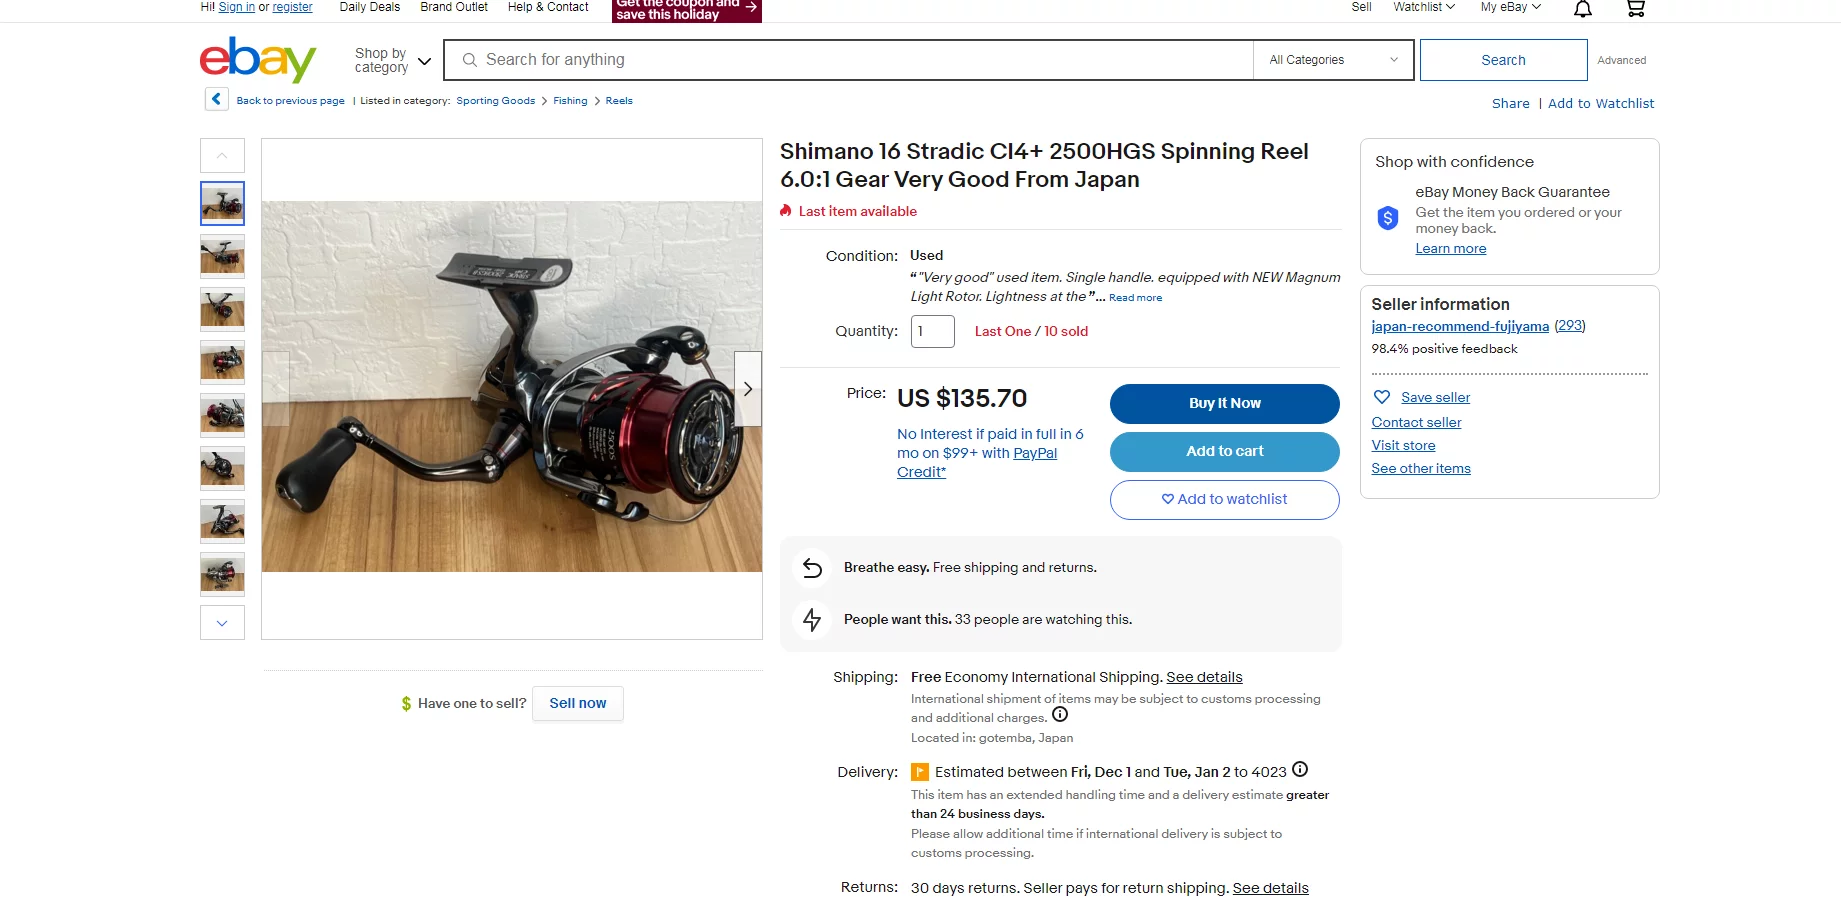 Best Fishing Reels for Dropshipping